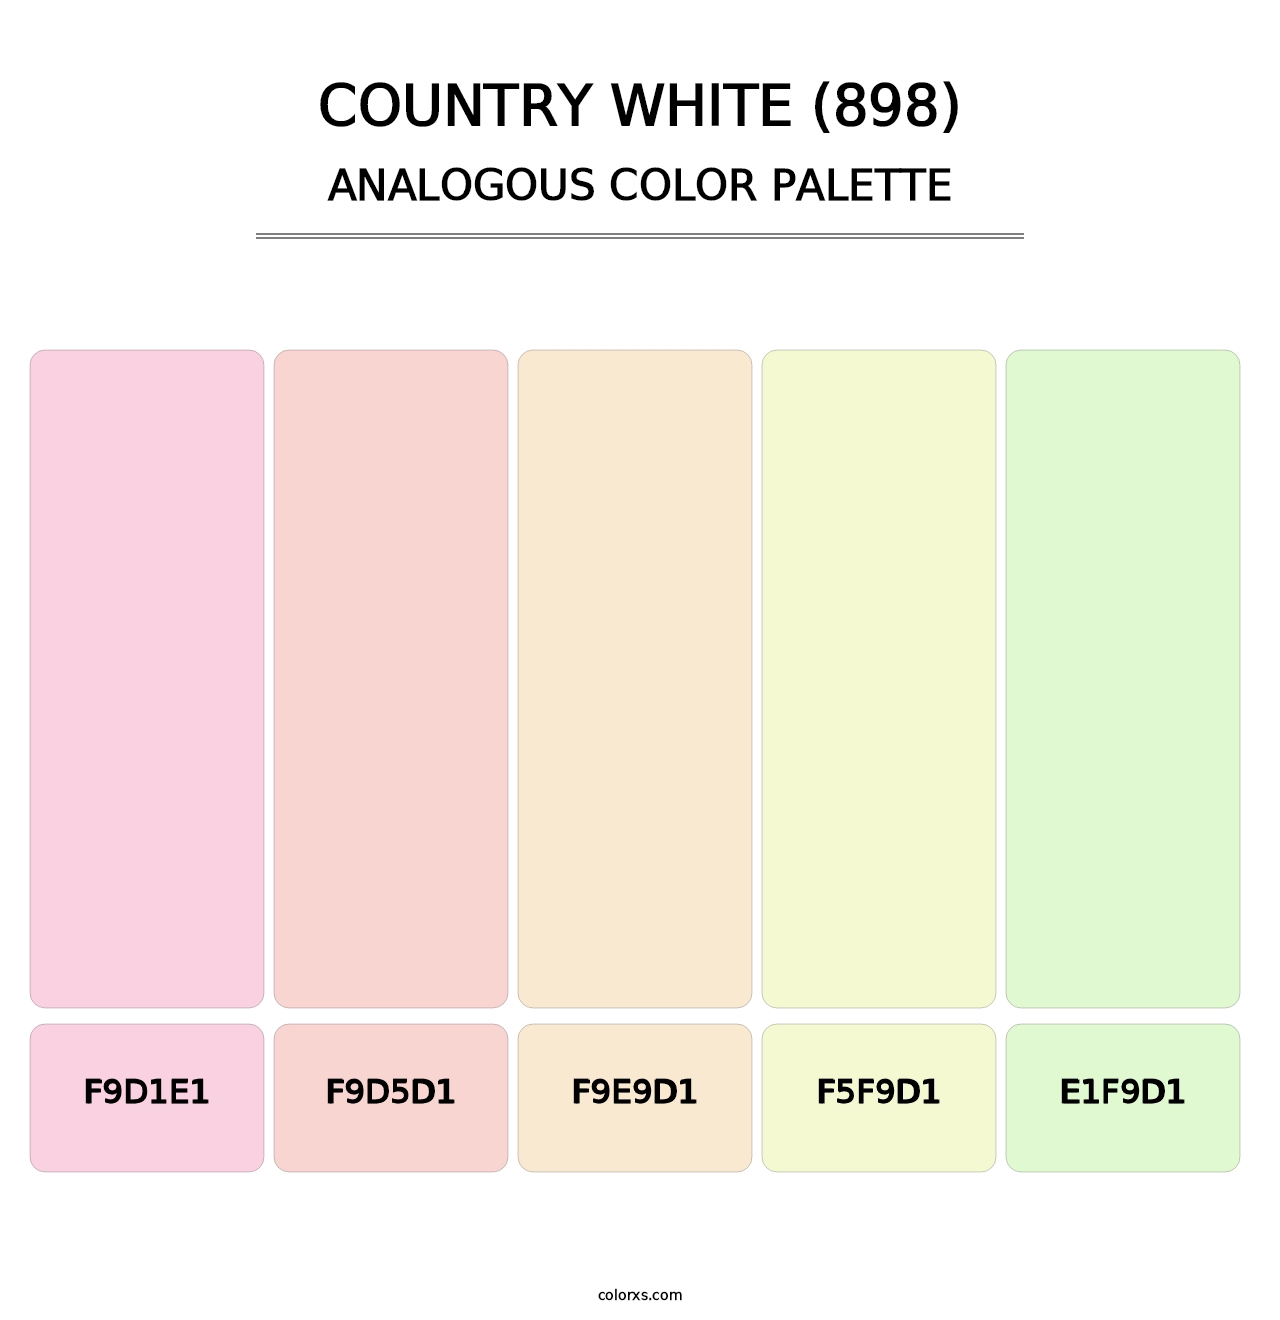 Country White (898) - Analogous Color Palette